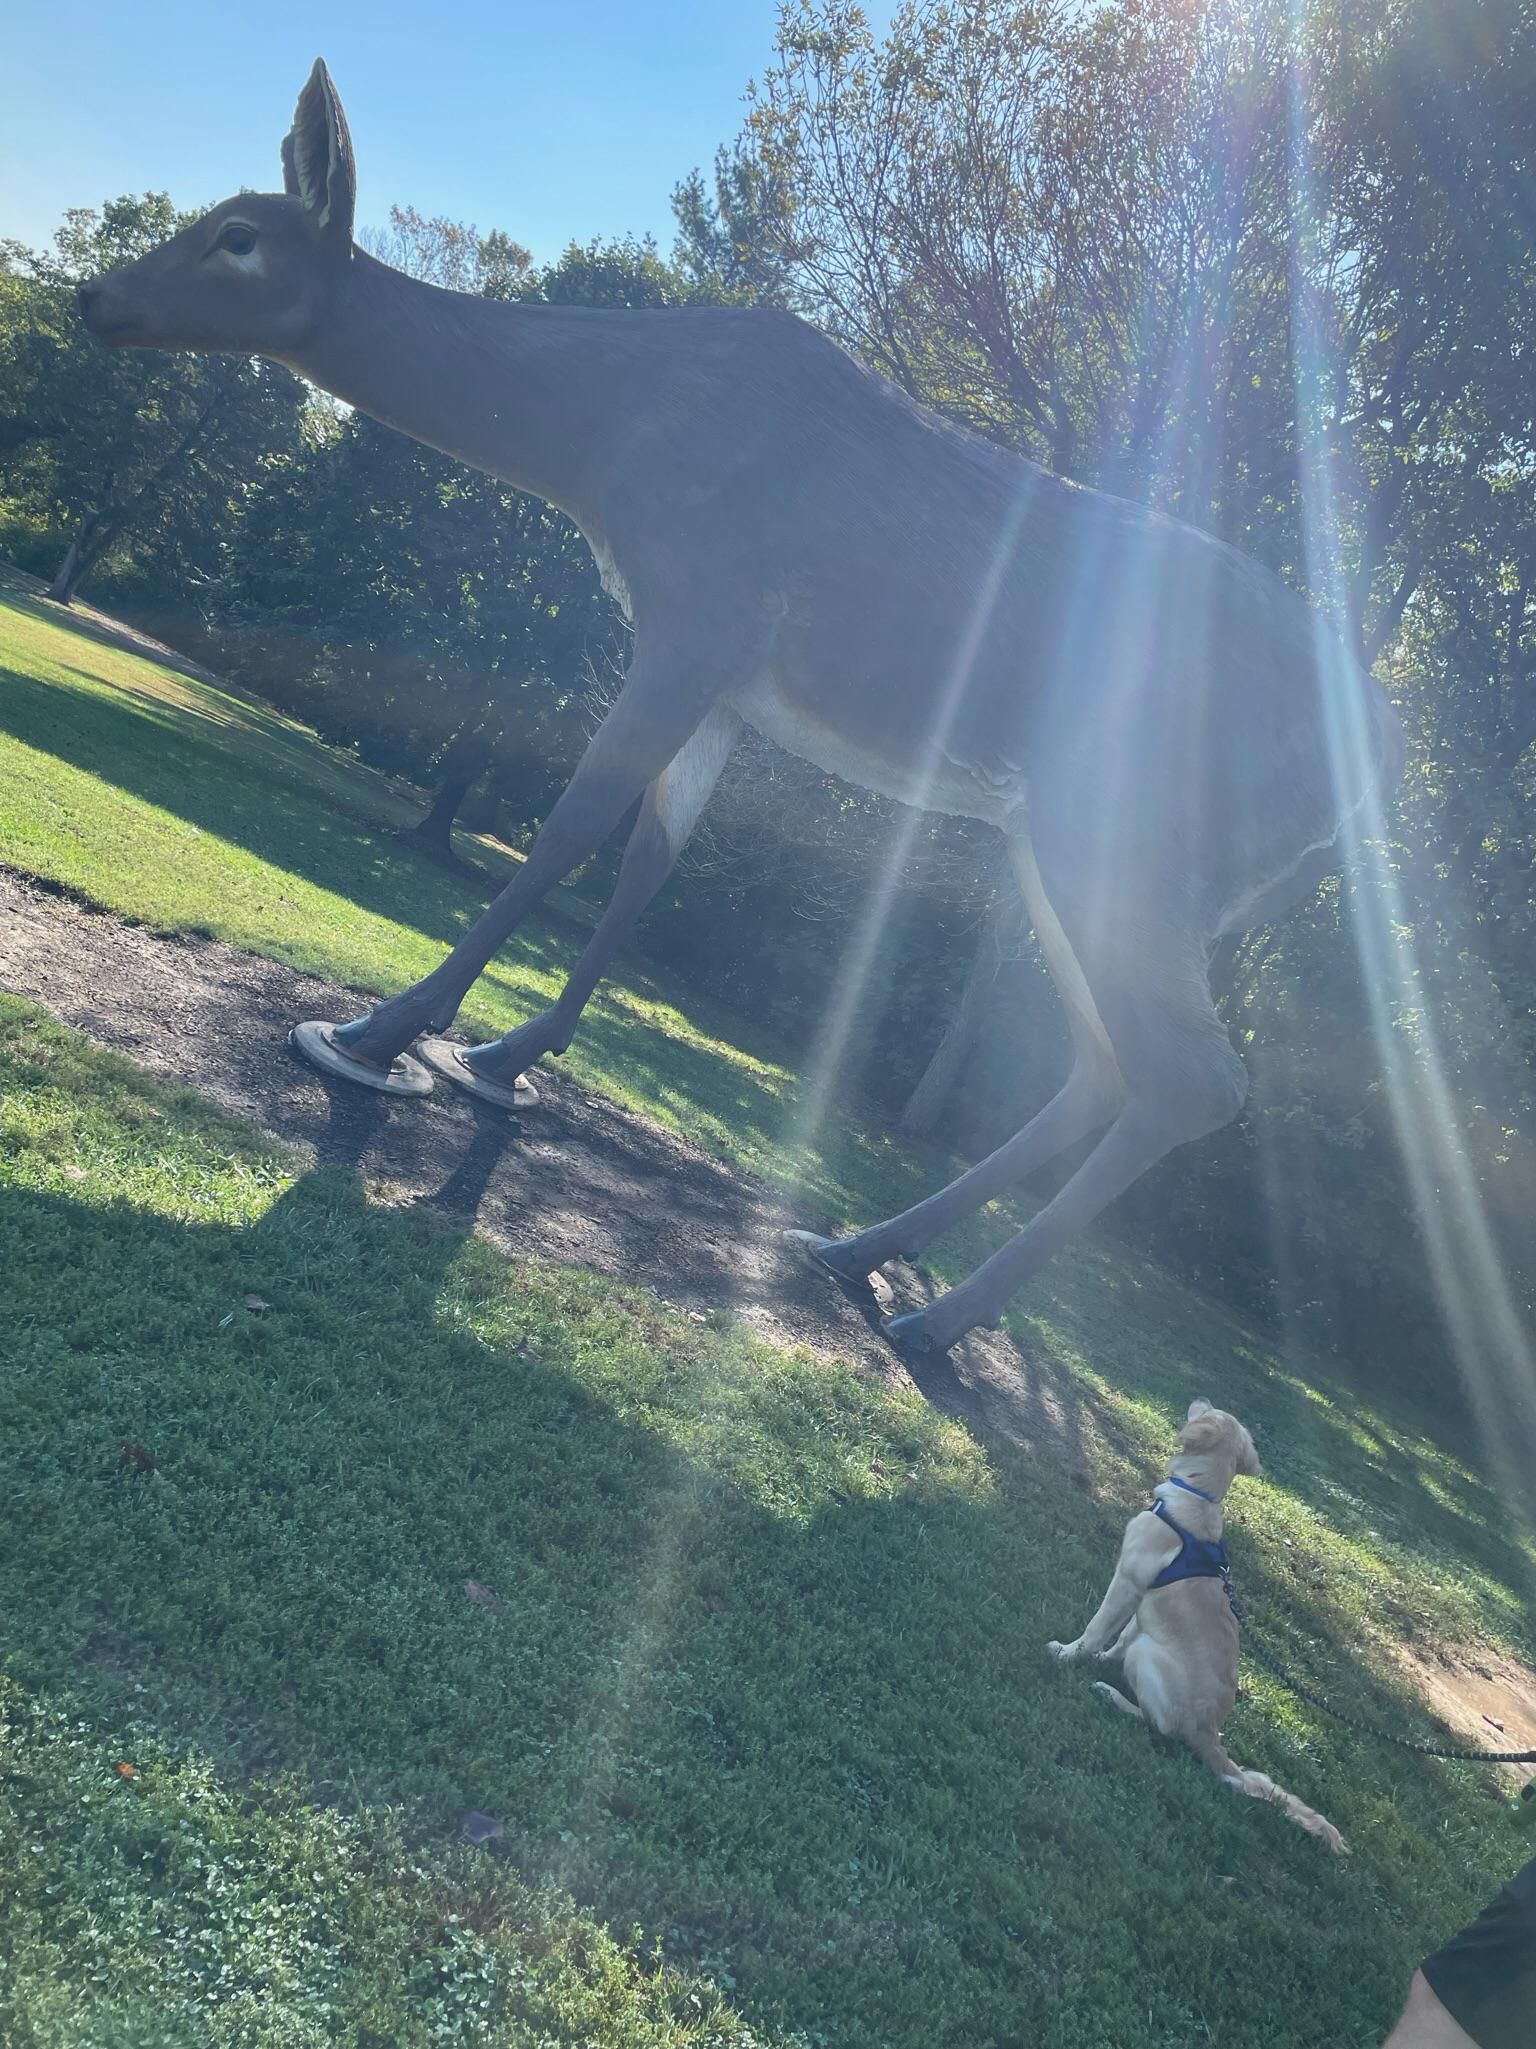 Enjoy this photo of my dog’s mind in the process of being blown at the sculpture park.